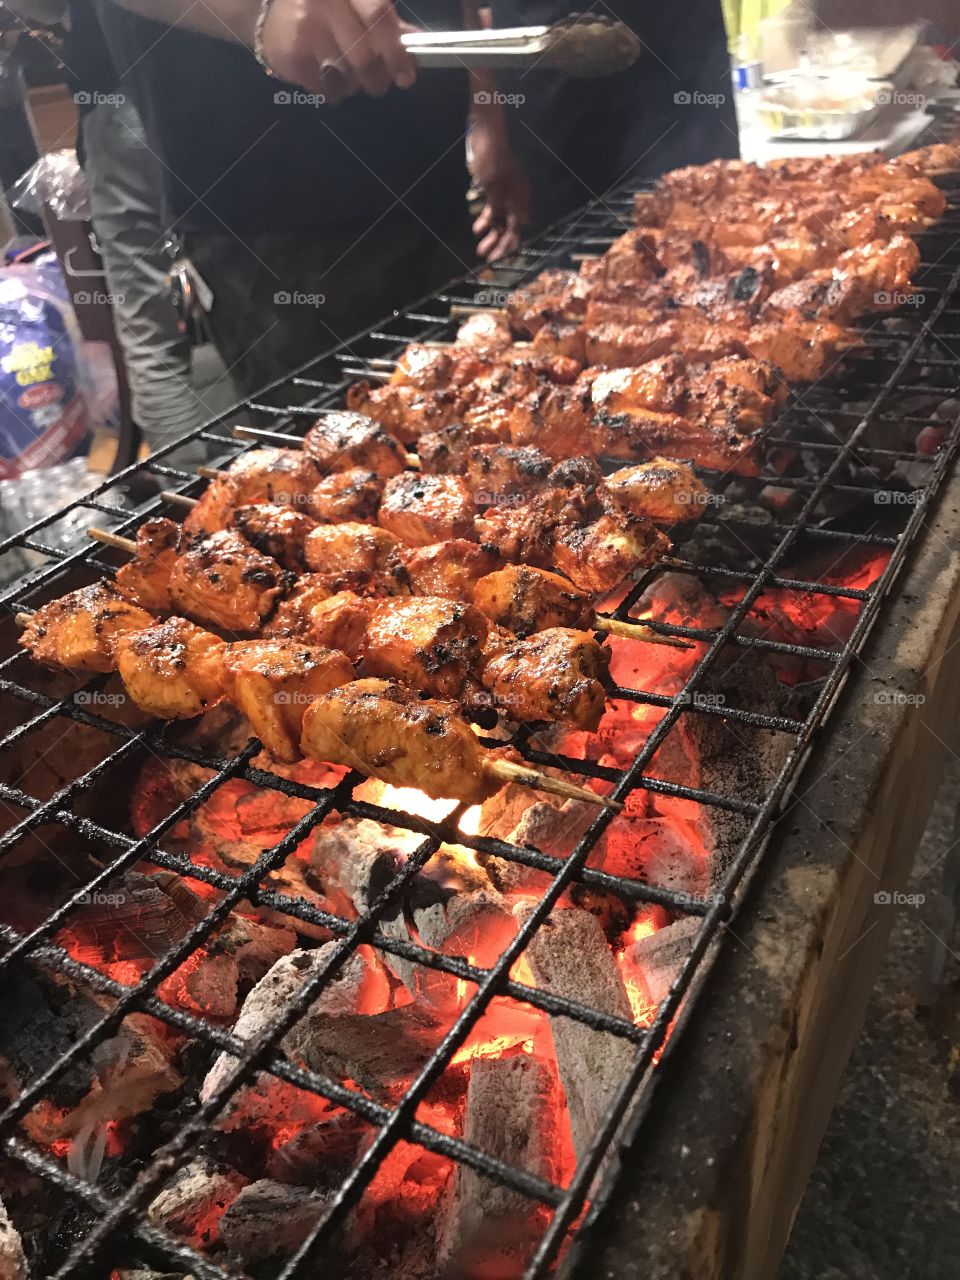 Delicious BBQ Chicken at Taste of Lawrence Festival